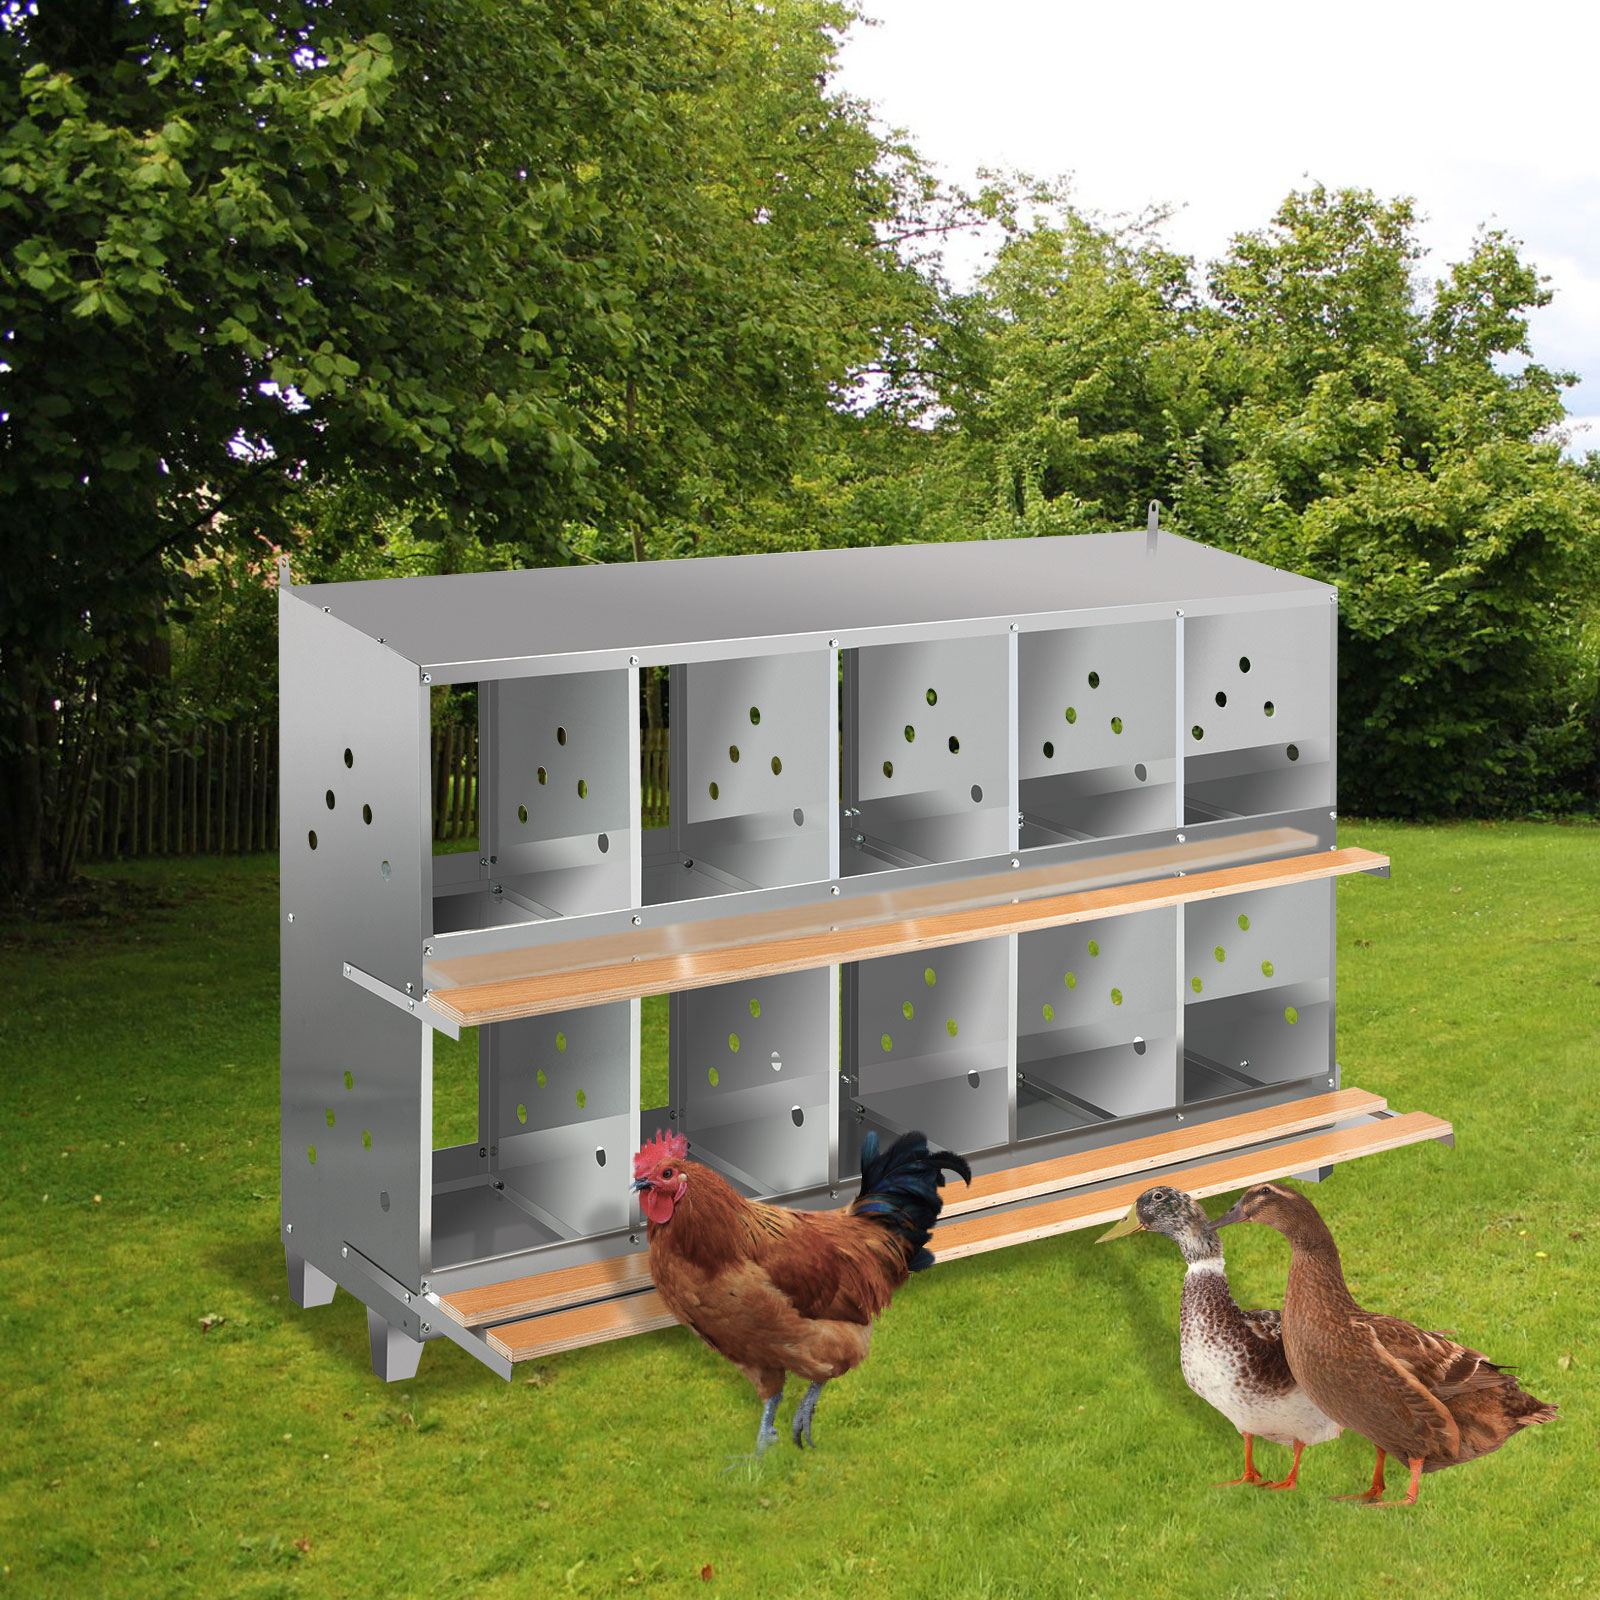 Ten-Hole Metal Chicken Nesting Boxes